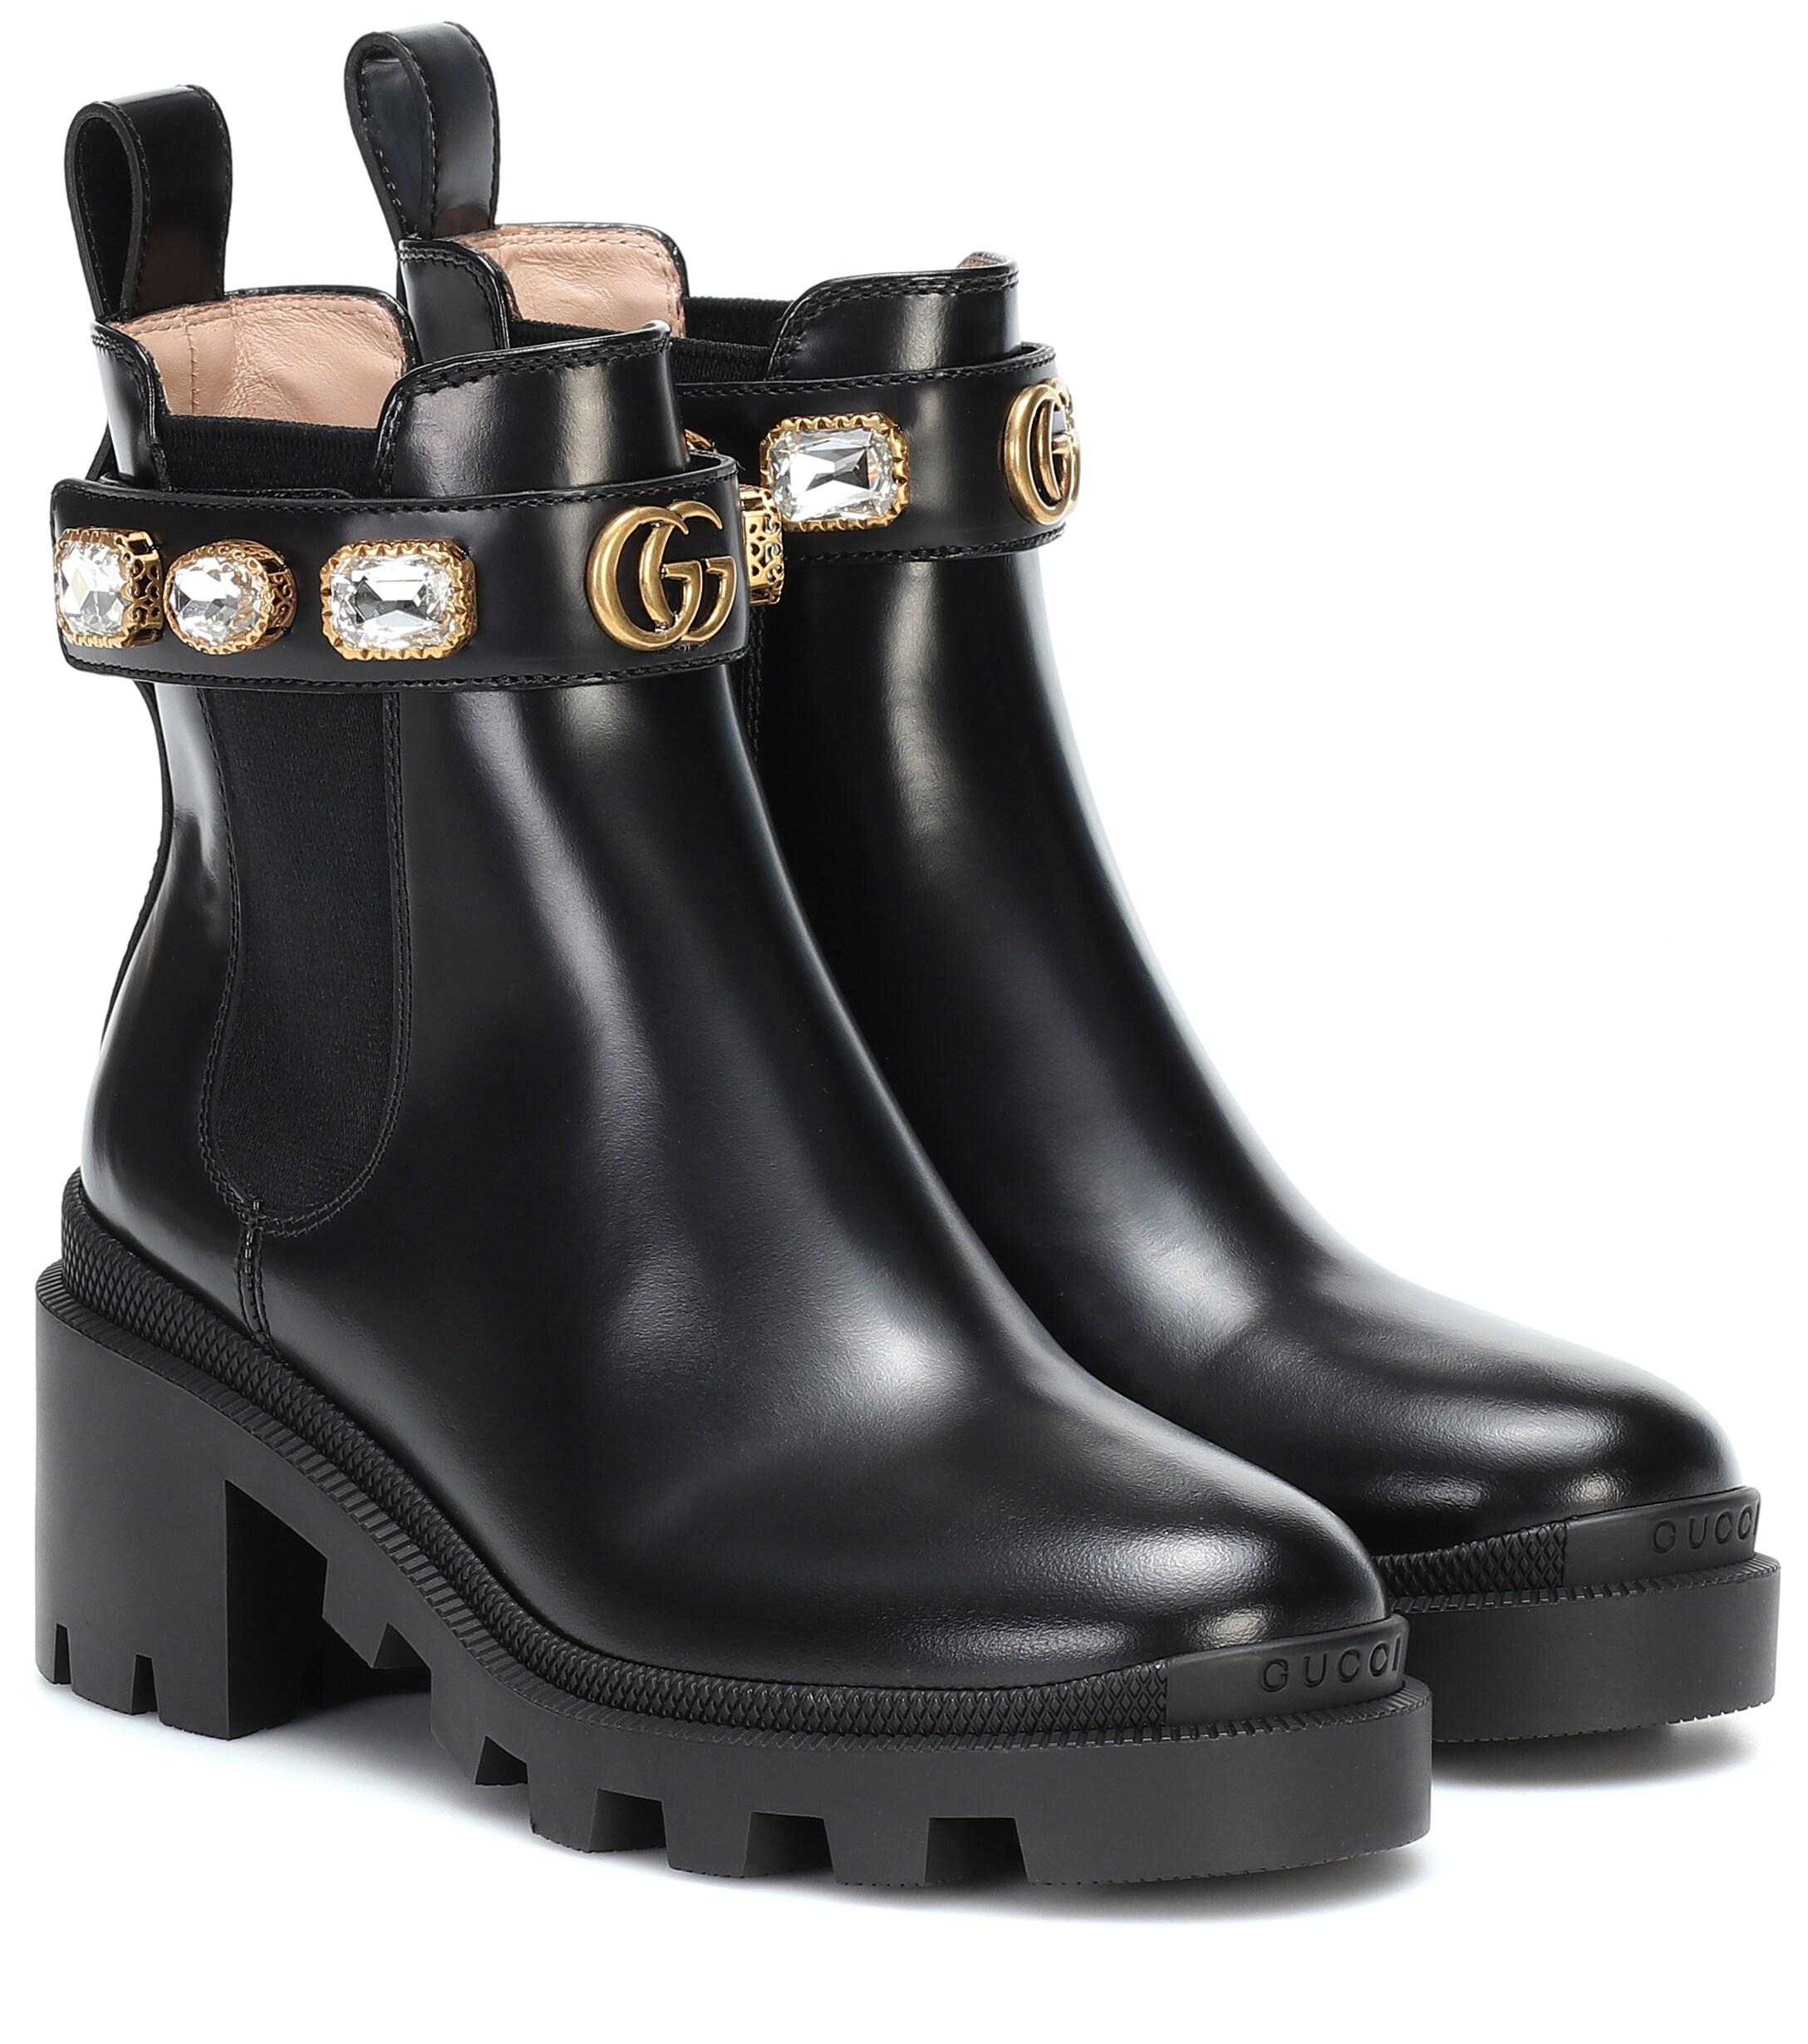 Gucci Embellished Leather Ankle Boots in Black - Lyst